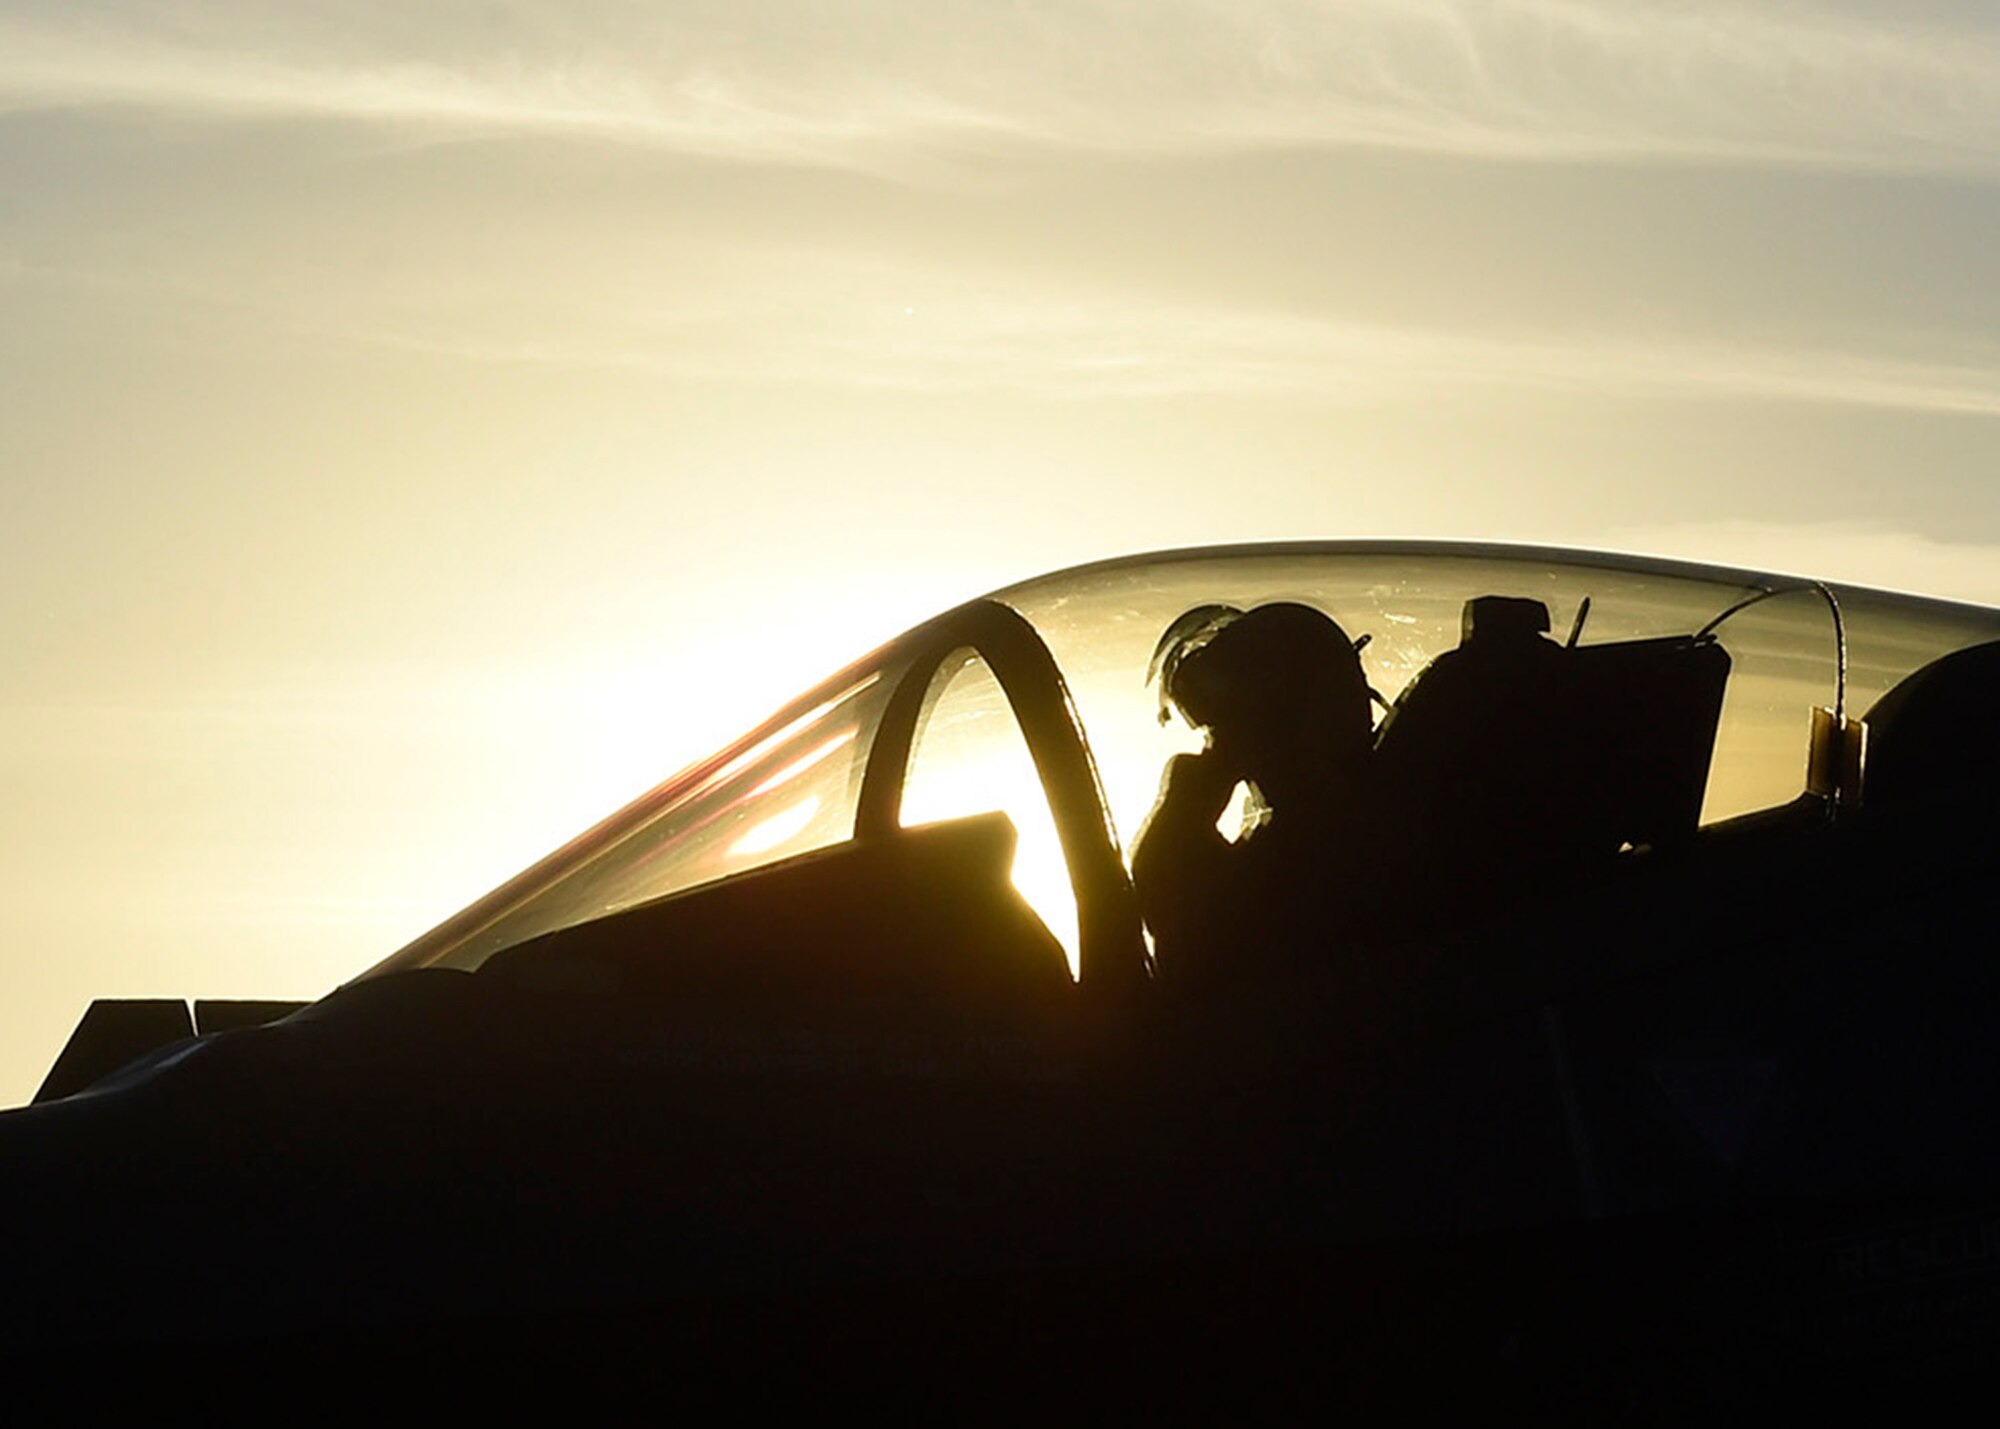 Maj. Will Andreotta, 61st Fighter Squadron heritage flight pilot, sits in the cockpit of an F-35 Lightning II during the Heritage Flight Training and Certification Course Feb. 10, 2017, at Davis-Monthan Air Force Base, Ariz. Heritage and demonstration teams need to be certified annually to participate in open houses and air shows worldwide. (U.S. Air Force photo by Senior Airman James Hensley)   